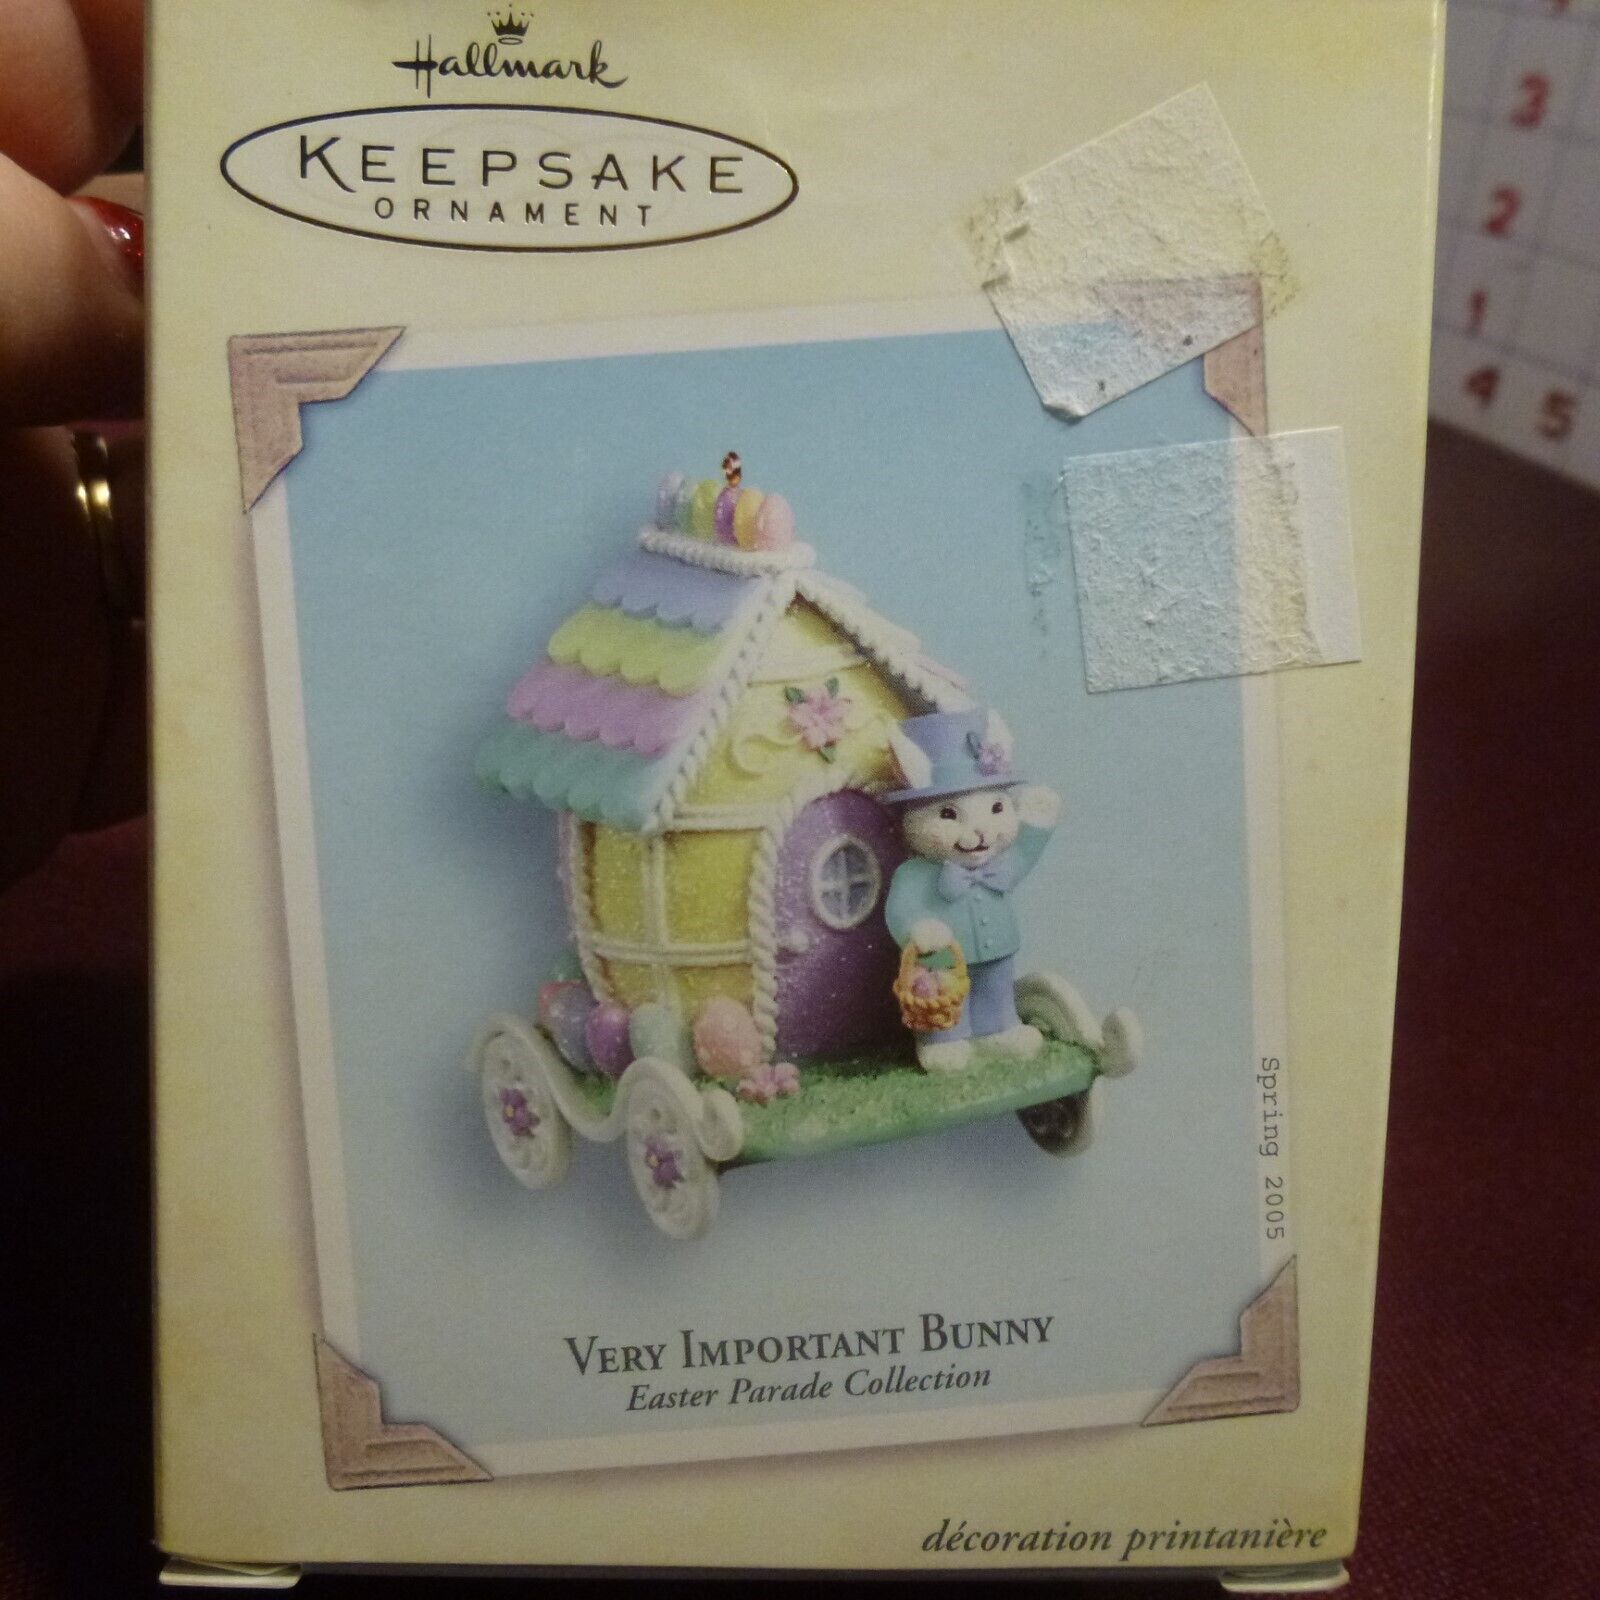 'Very Important Bunny' 'Easter Parade Collection' Hallmark 2005 Ornament